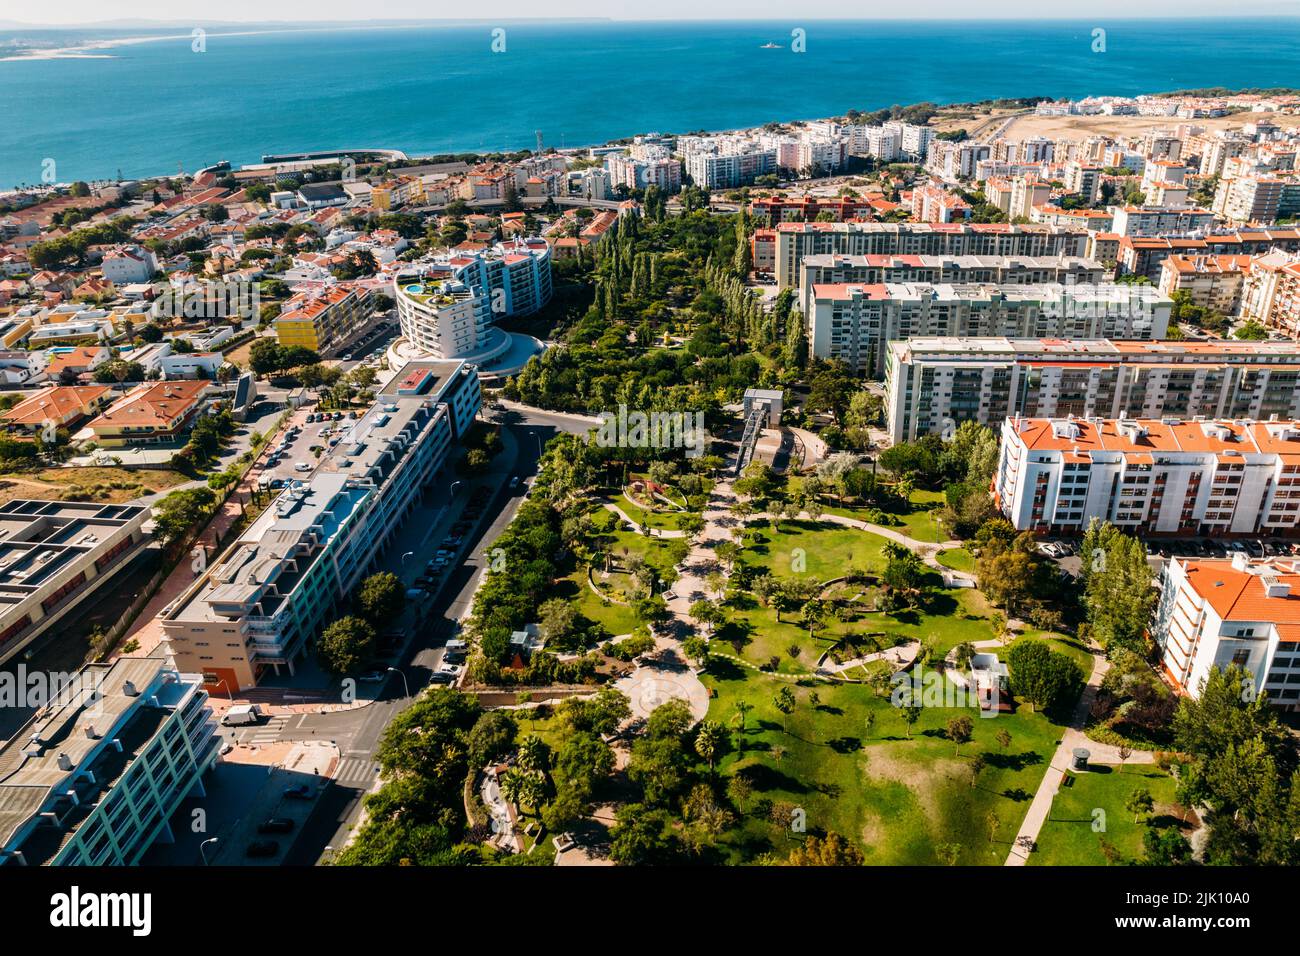 Lisbon, Portugal - July 29, 2022: Aerial drone view of Parque dos Poetas in Oerias, translated to Poet's Park Stock Photo